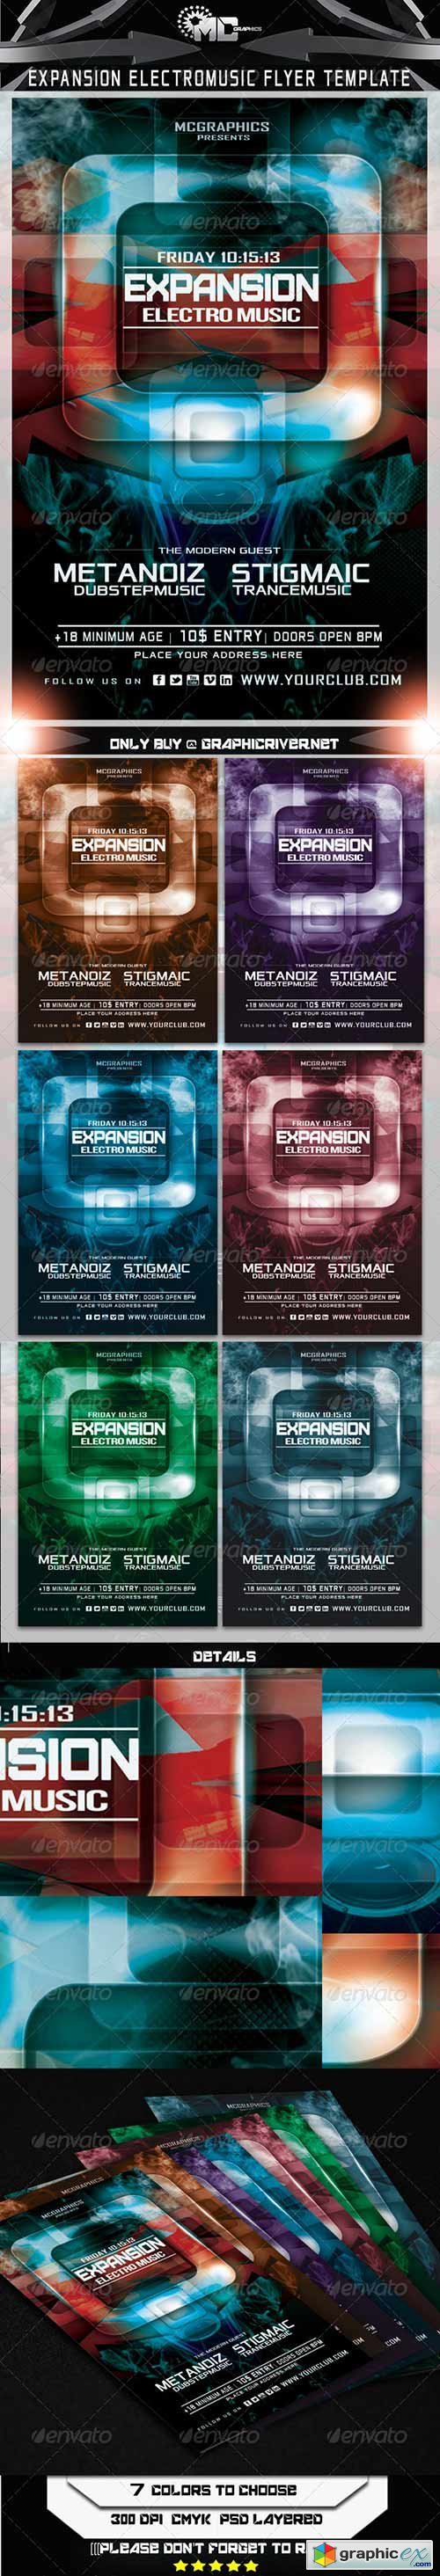 Expansion Electro Music Flyer Template